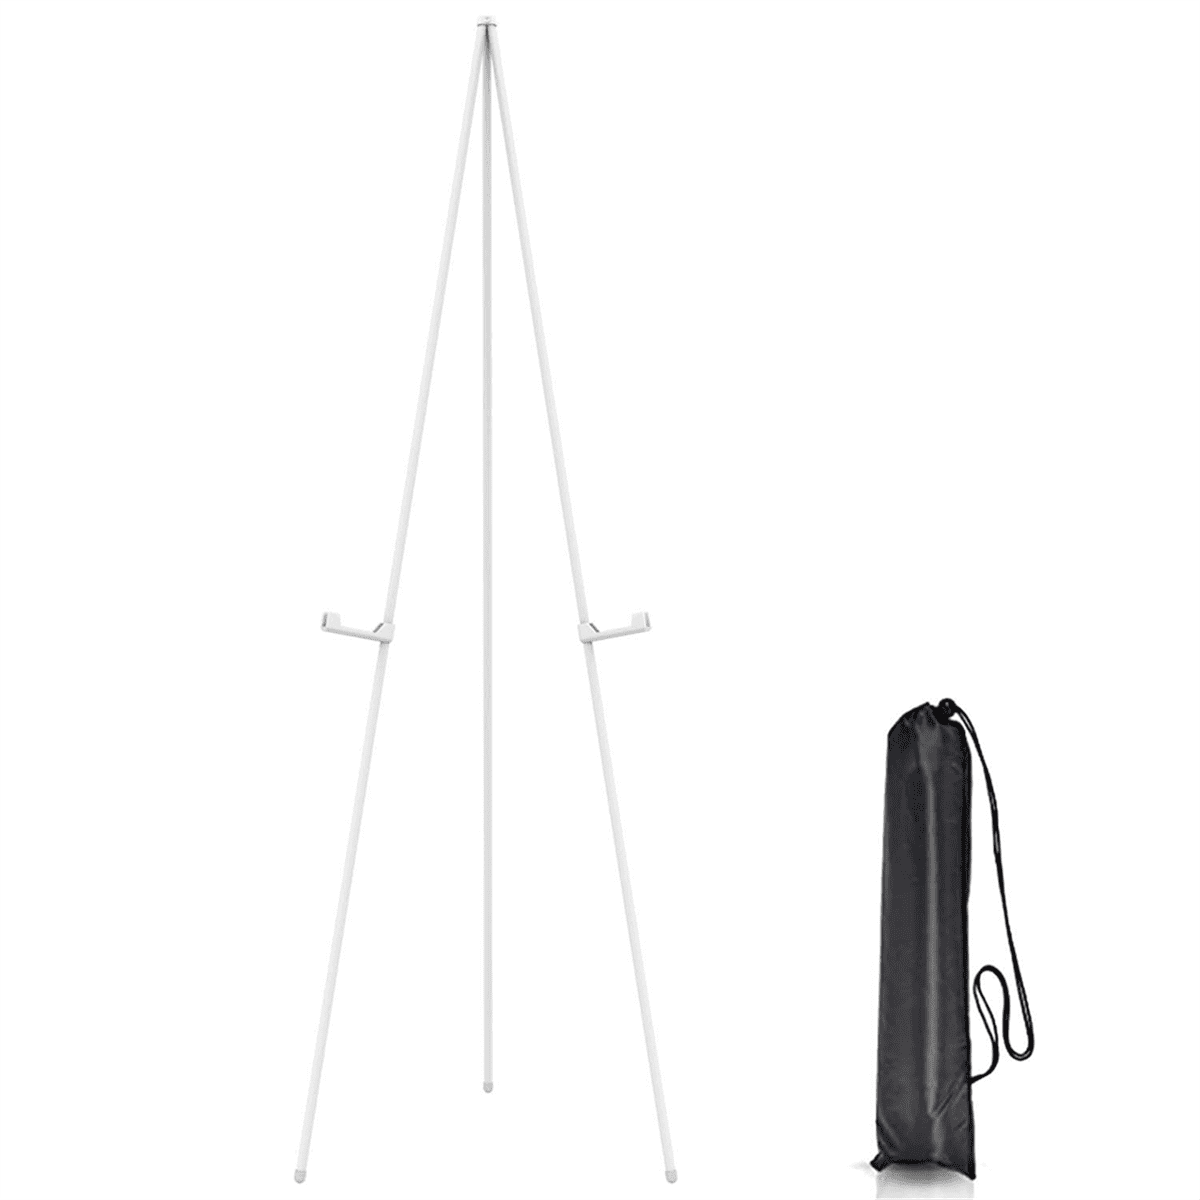  63 Telescoping Easel,Aluminum Easels For Signs,Easel Stand  For Display,Easel For Wedding Sign Poster,Portable Art Easel Stand For  Painting, Whiteboard Easel Support 25 Lbs, 1pcs